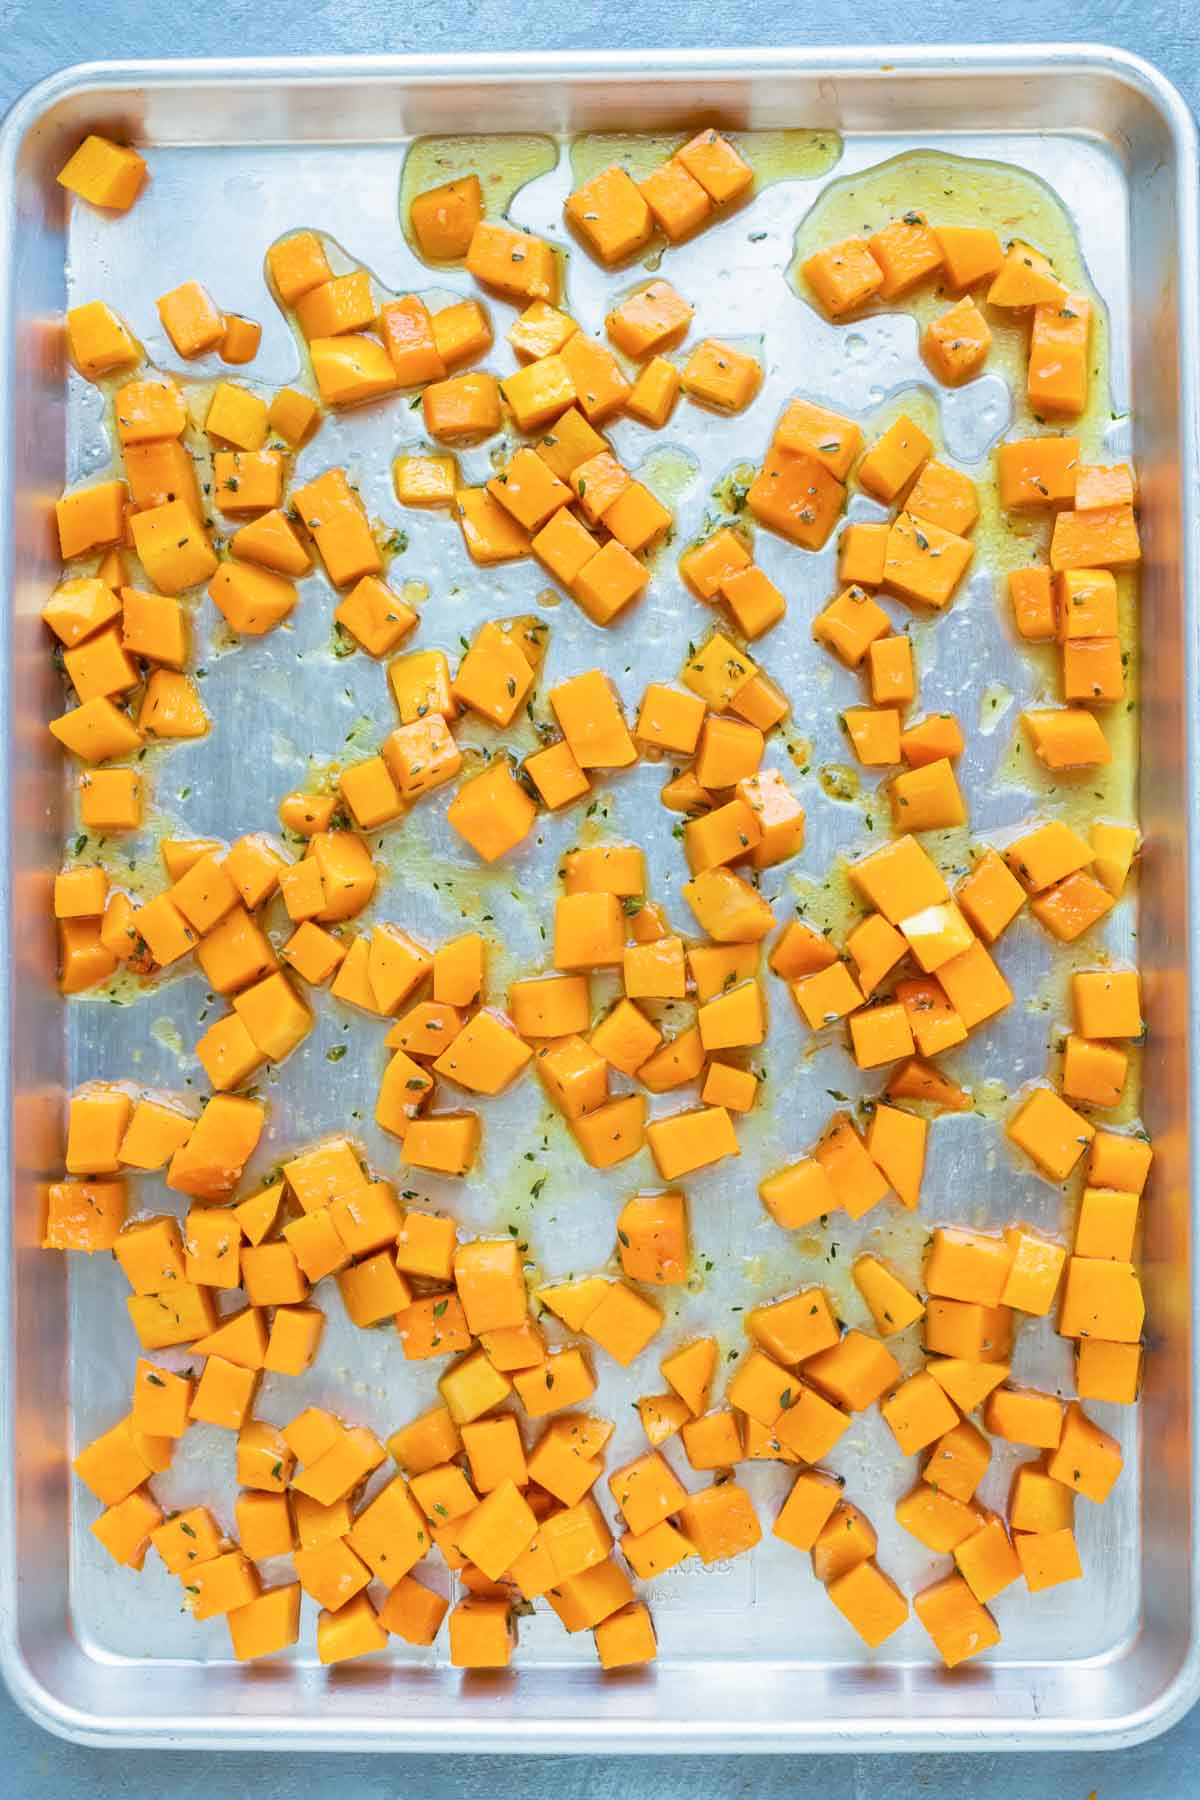 An image of roasted butternut squash cubes on a large baking sheet before baking.